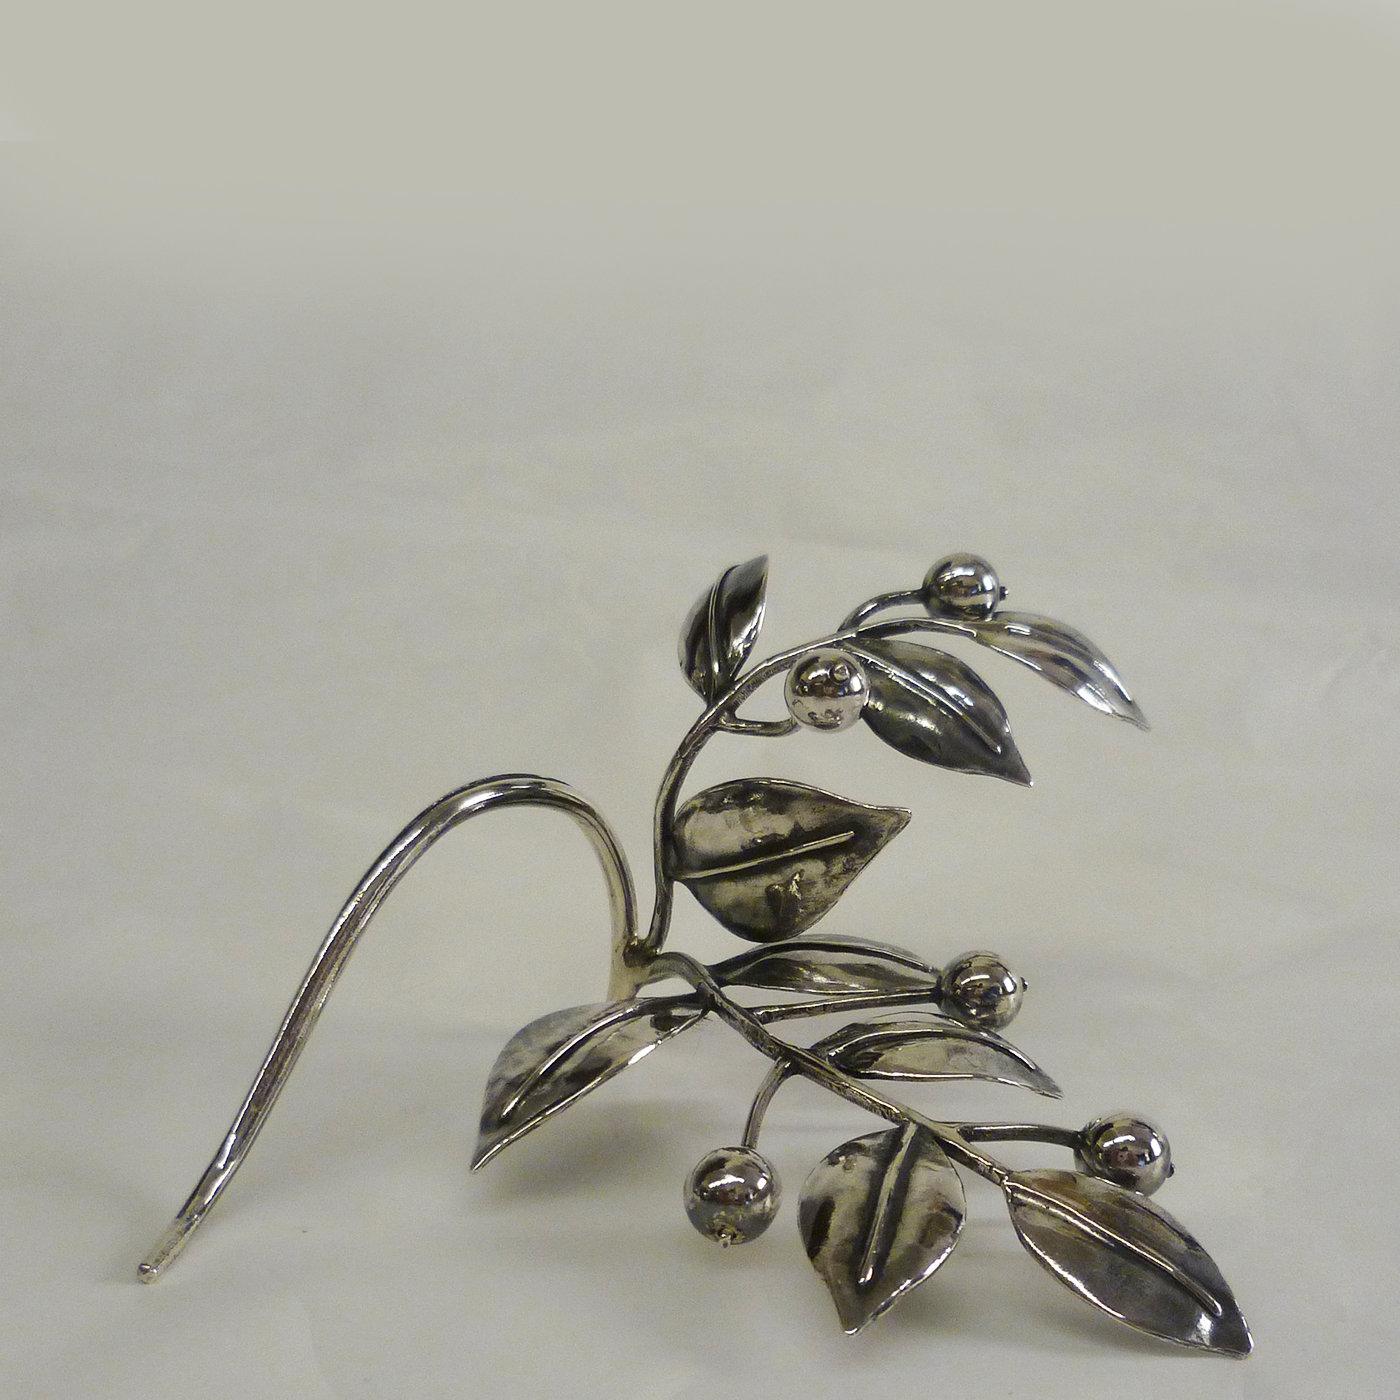 Made of silver and boasting exquisite craftsmanship, this stunning object of functional decor will add a delicate holiday touch to an elegant dinner table. Shaped as a double mistletoe branch, this piece will create a subtle decoration, while also